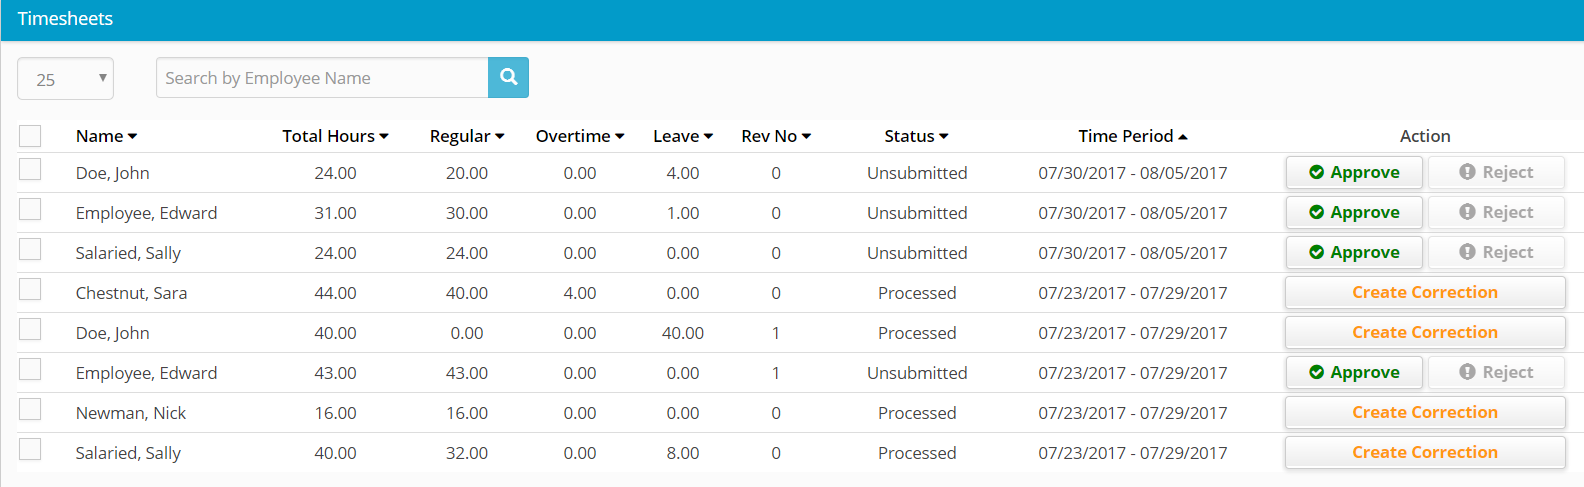 Hour Timesheet Product Screenshot of Manager Approval Feature